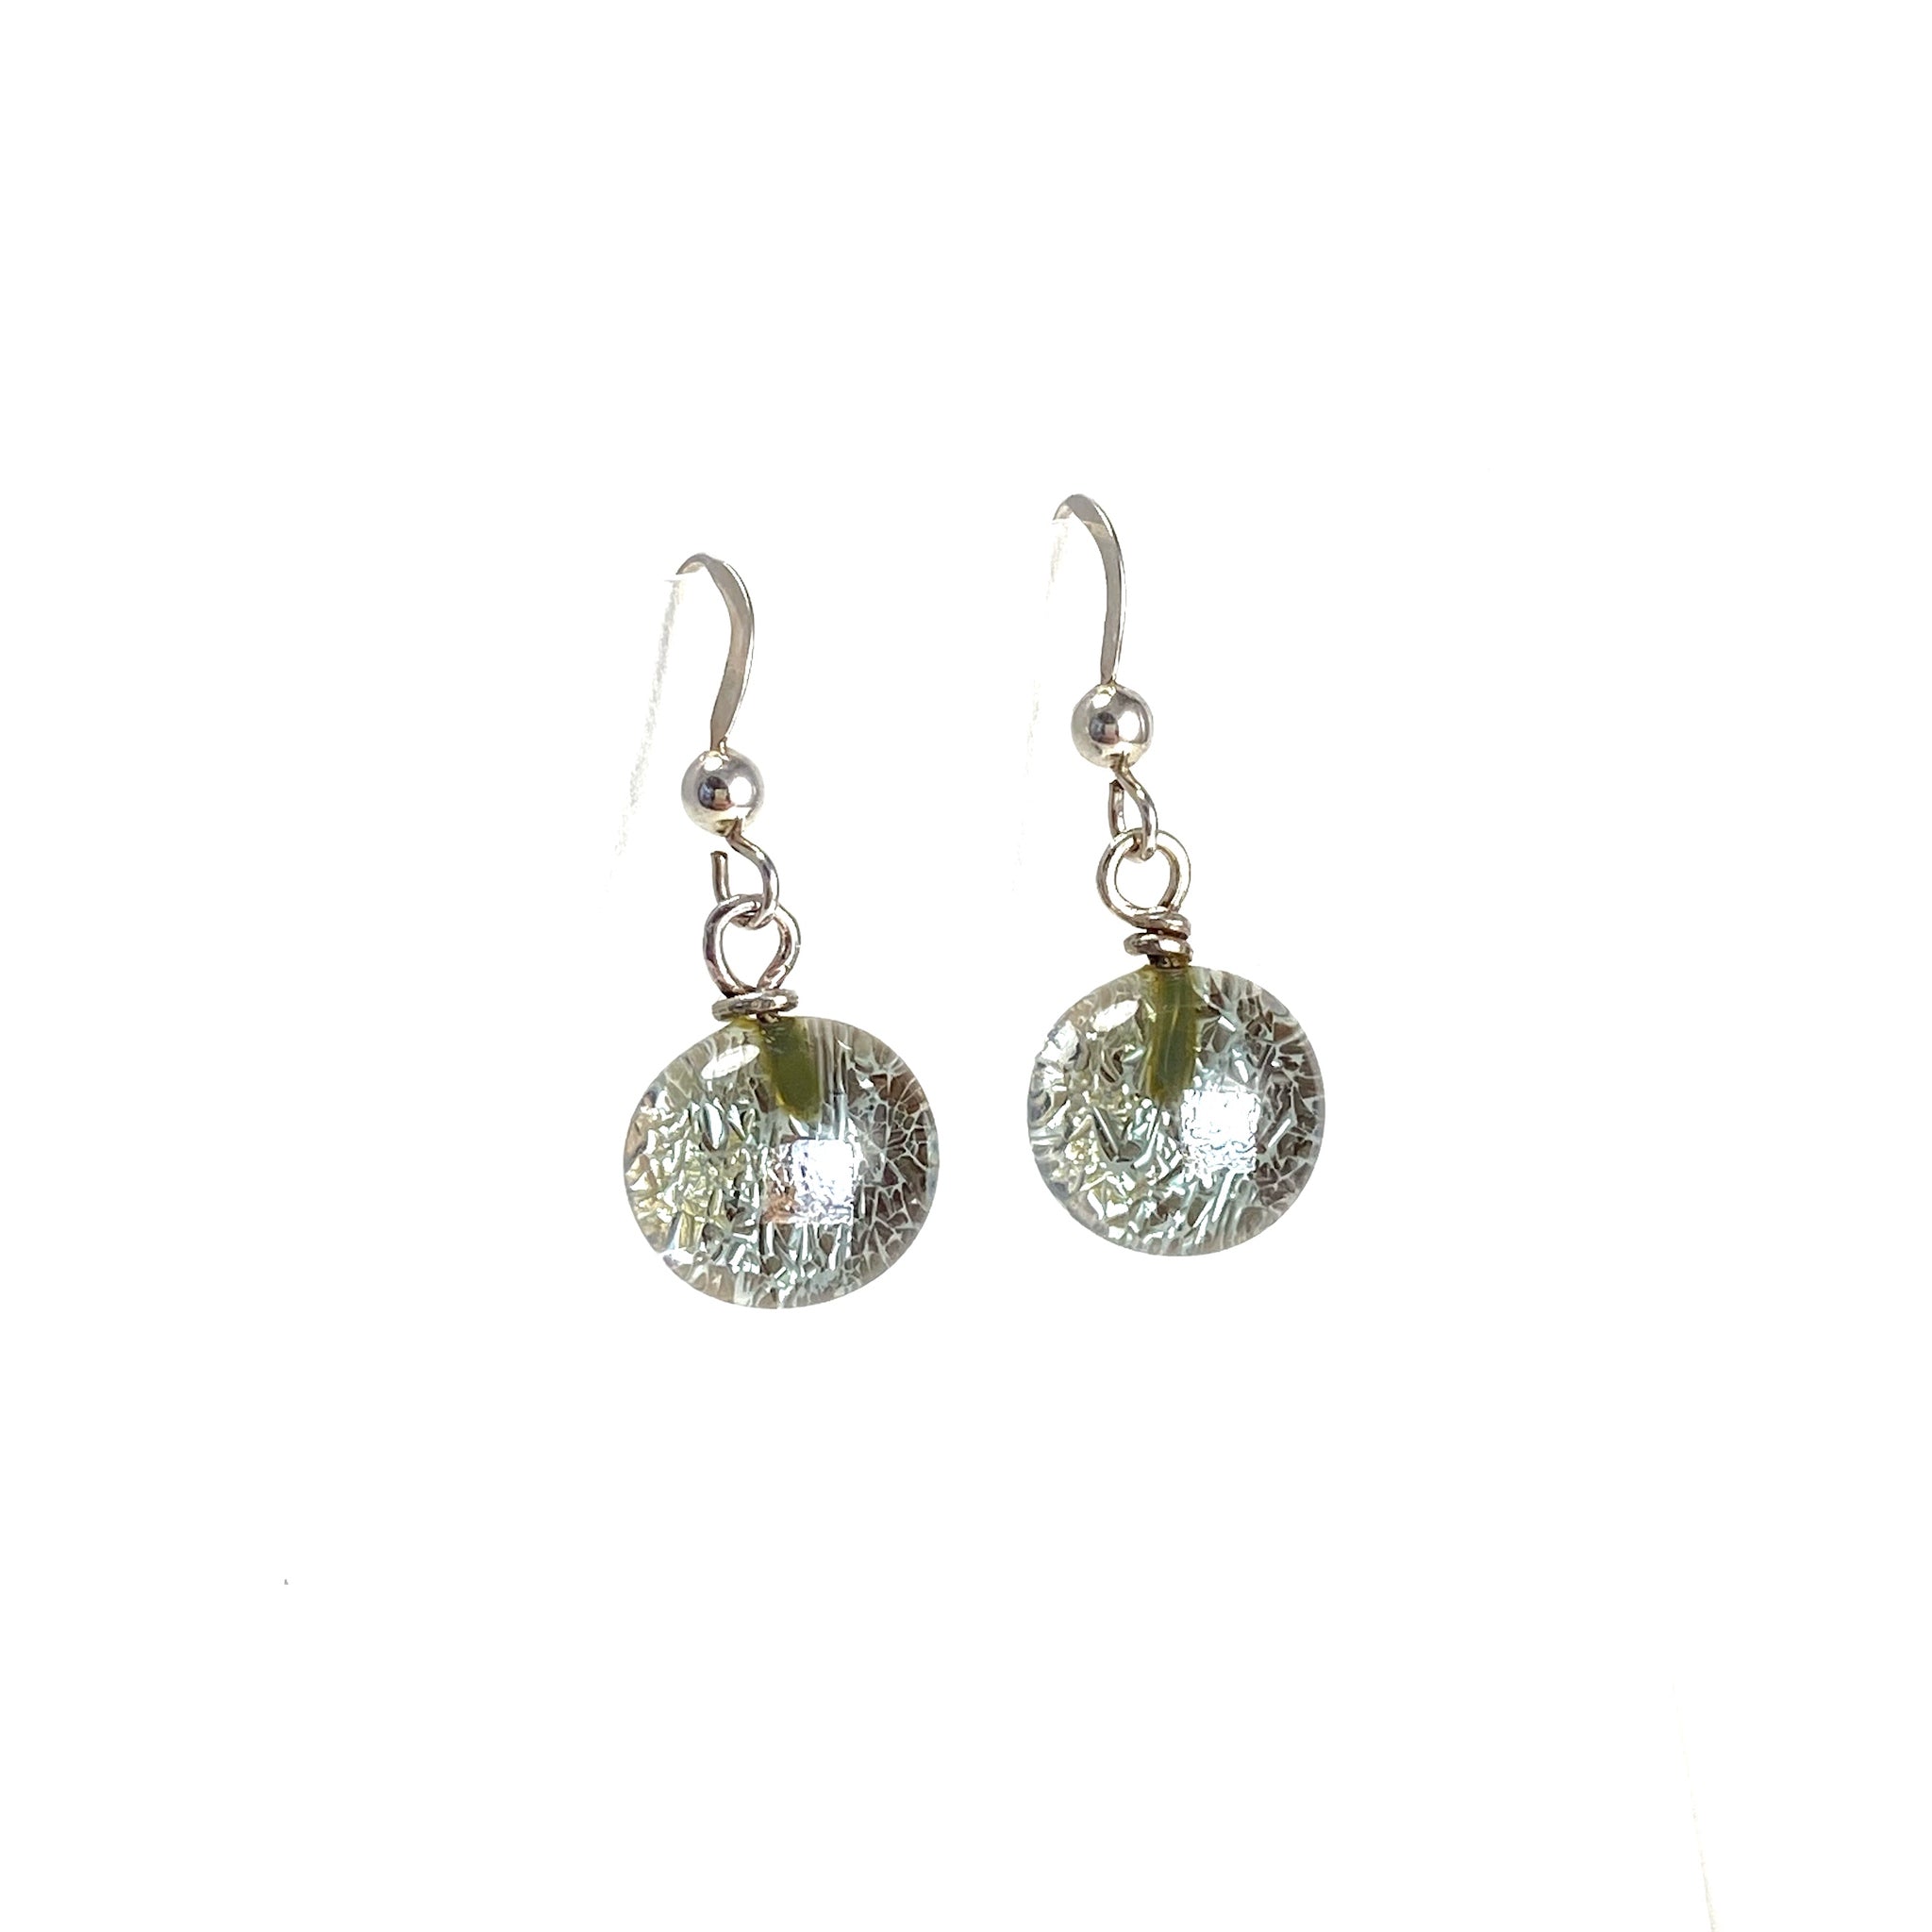 gray, space balls, sparkle, glass drops, earrings, fused glass, glass jewelry, glass and silver jewelry, handmade, handcrafted, American Craft, hand fabricated jewelry, hand fabricated jewellery, Athen, Georgia, colorful jewelry, sparkle, bullseye glass, dichroic glass, art jewelry